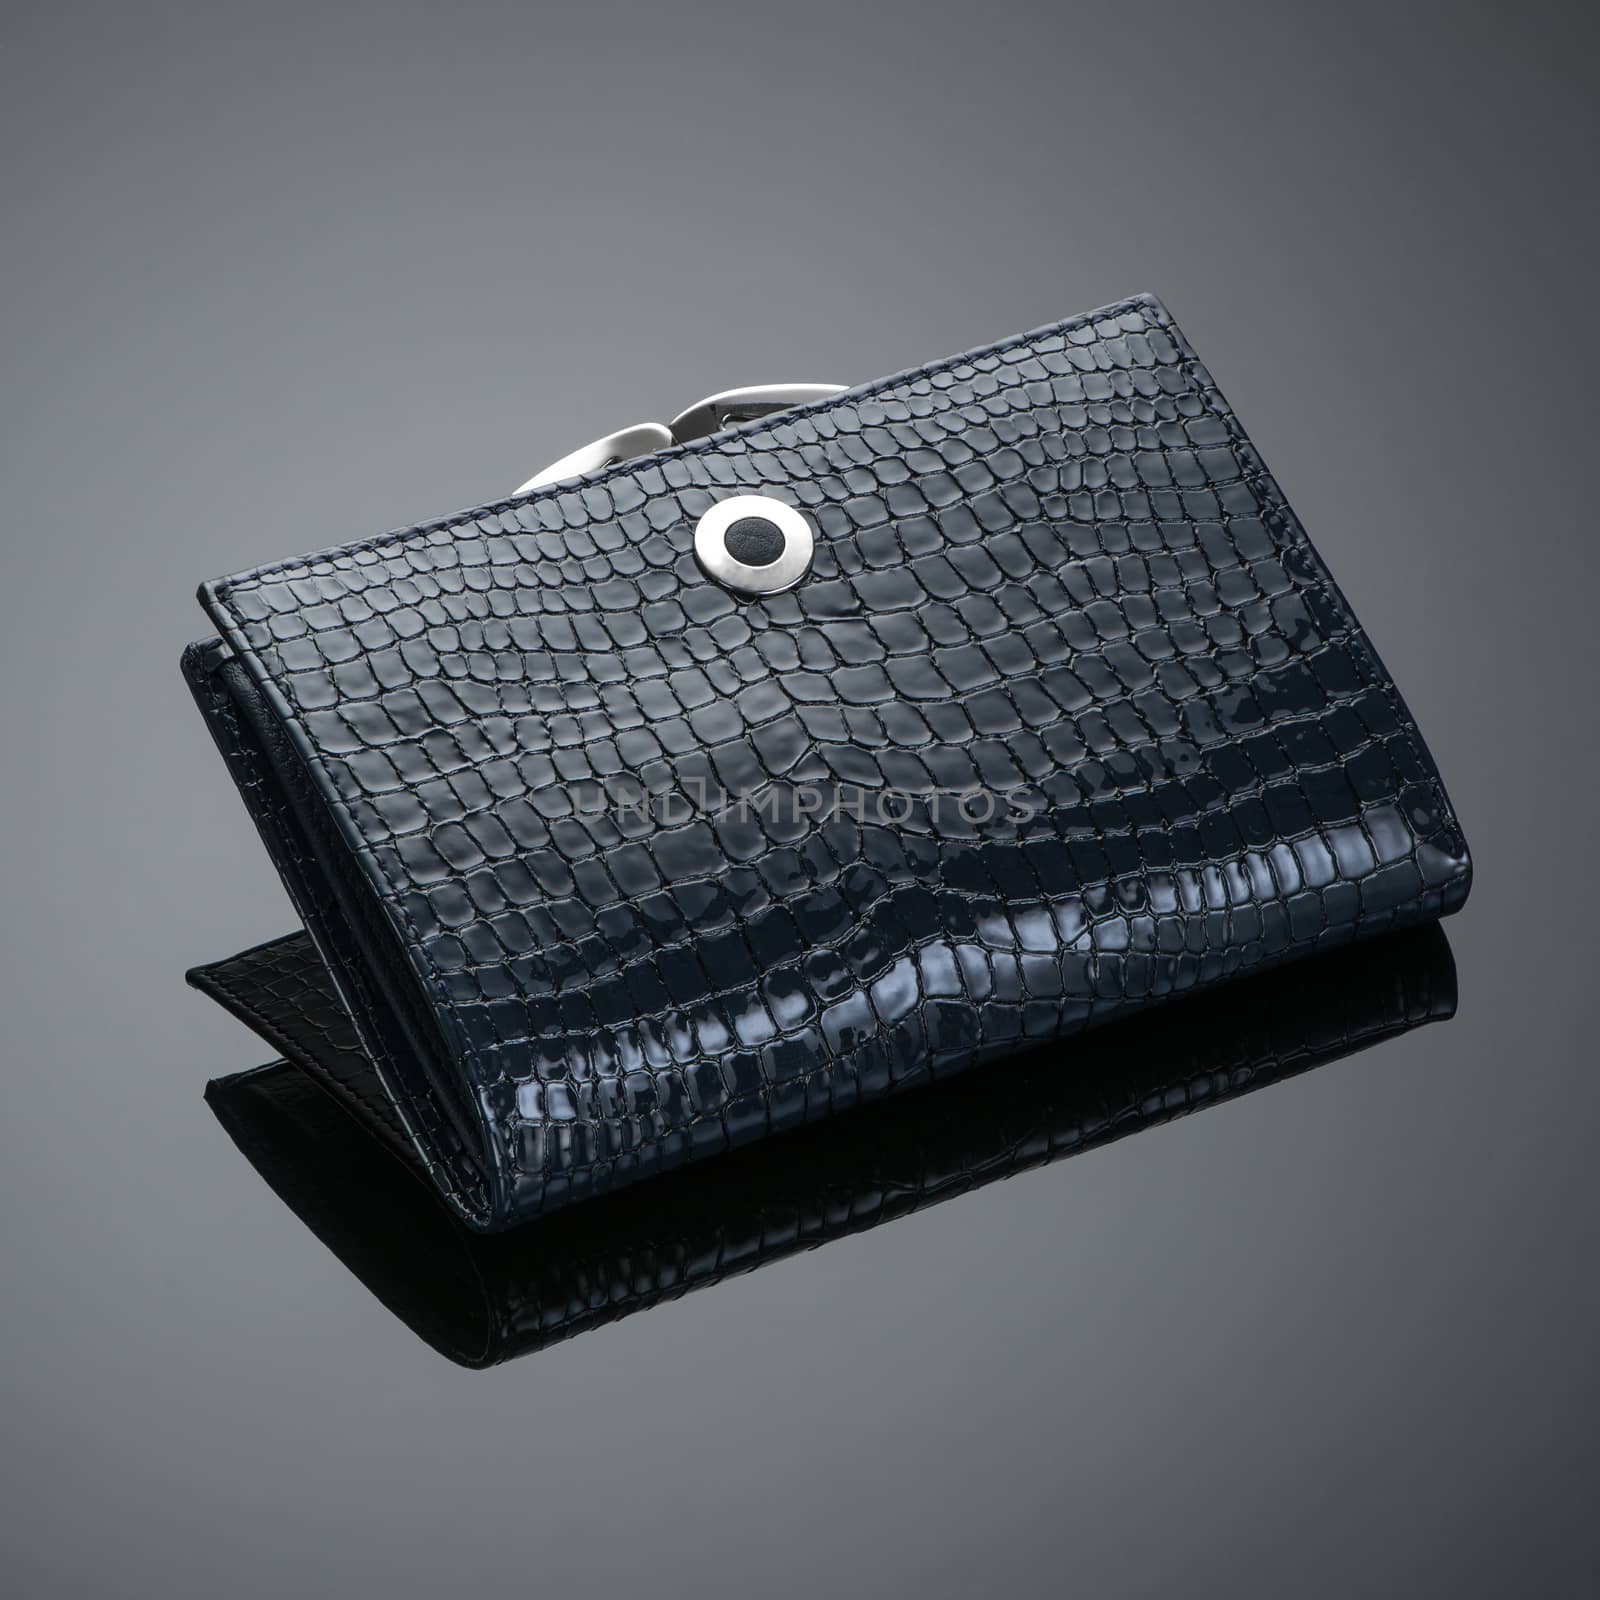 Fashionable leather women's wallet on a dark background